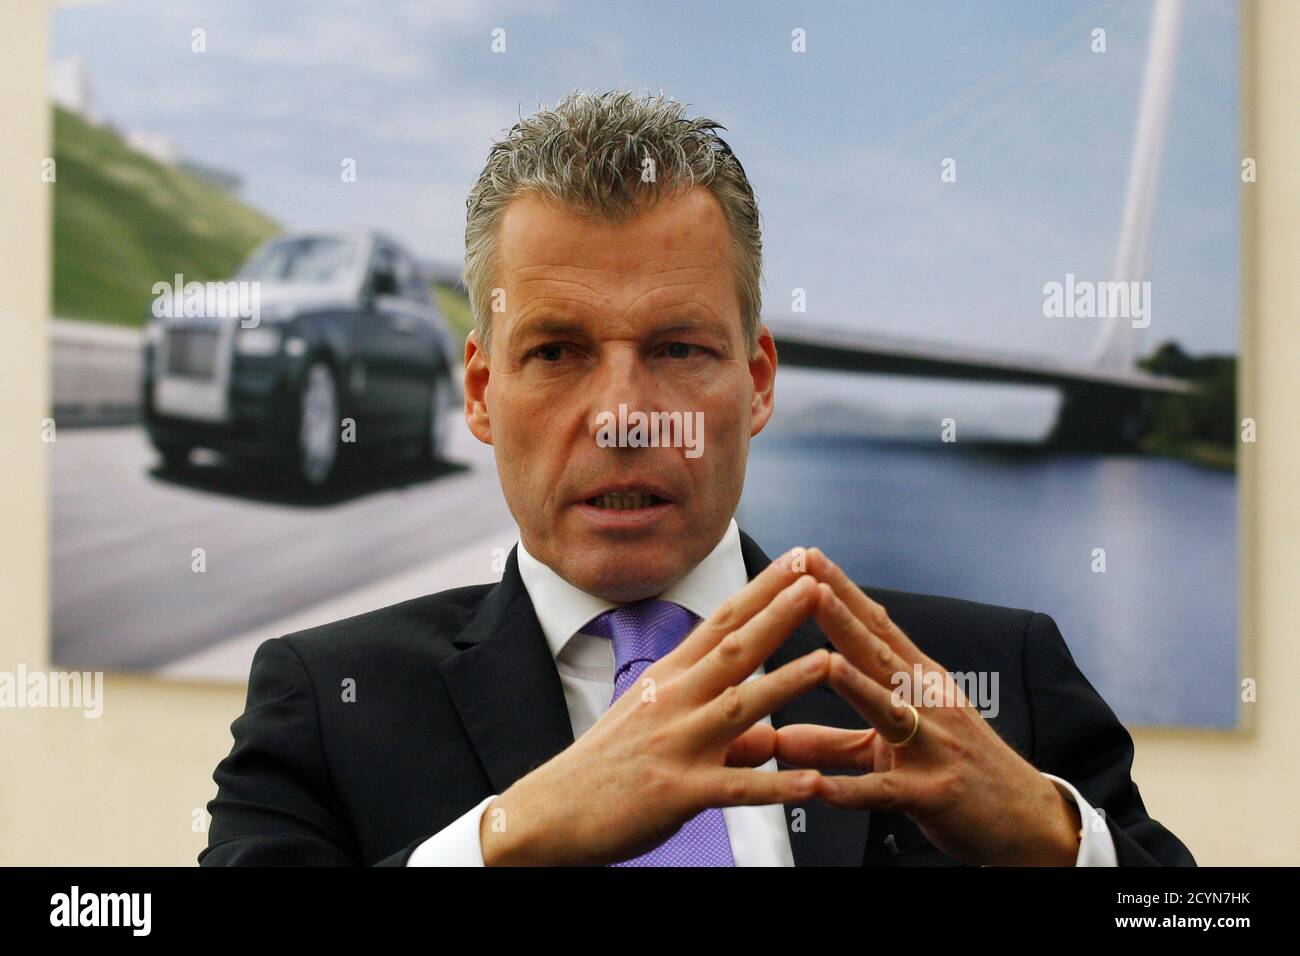 Rolls Royce Chief Executive High Resolution Stock Photography and Images -  Alamy